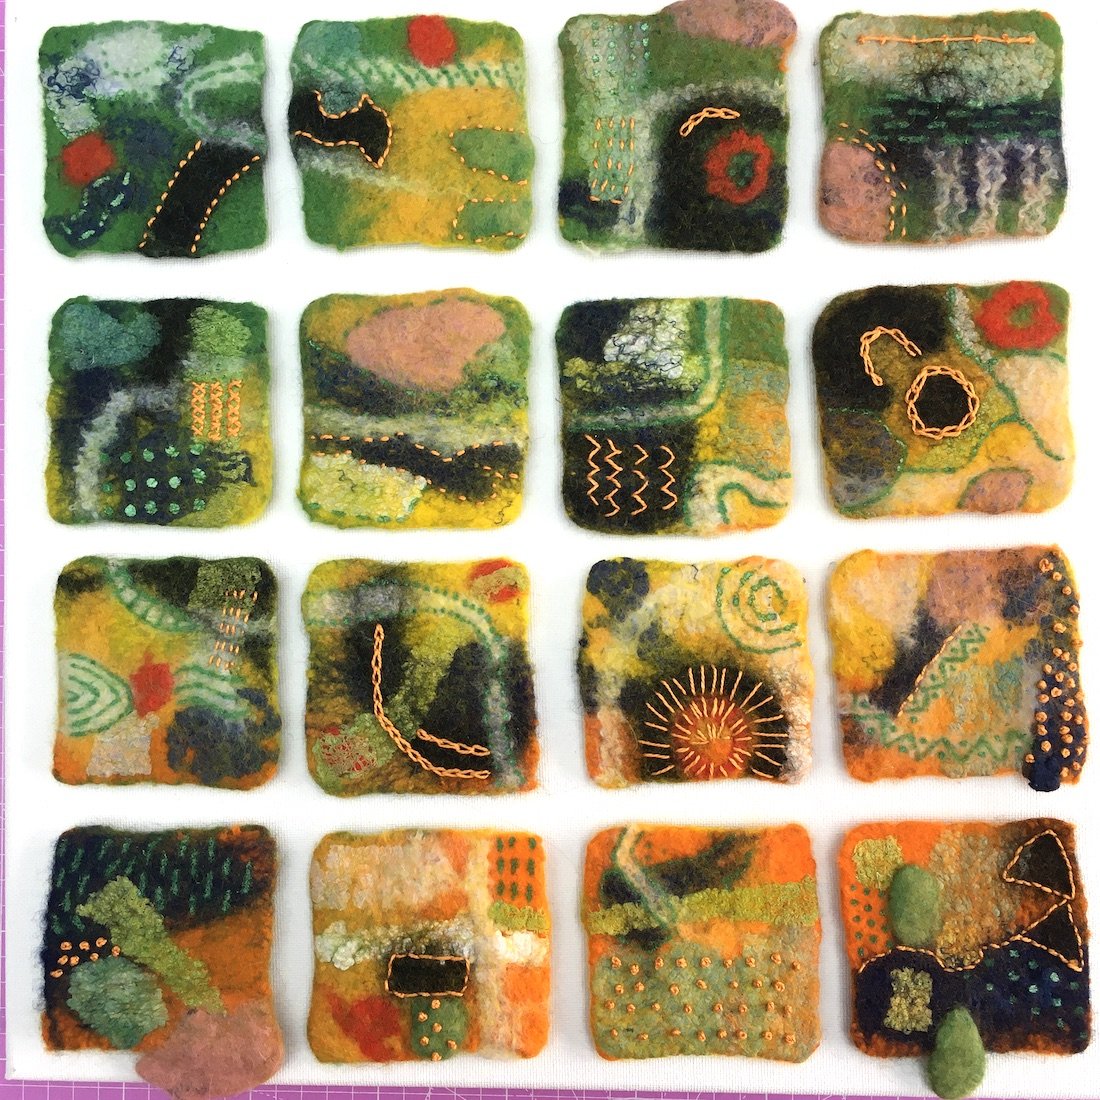 Wet Felt - abstract art samples for stitching